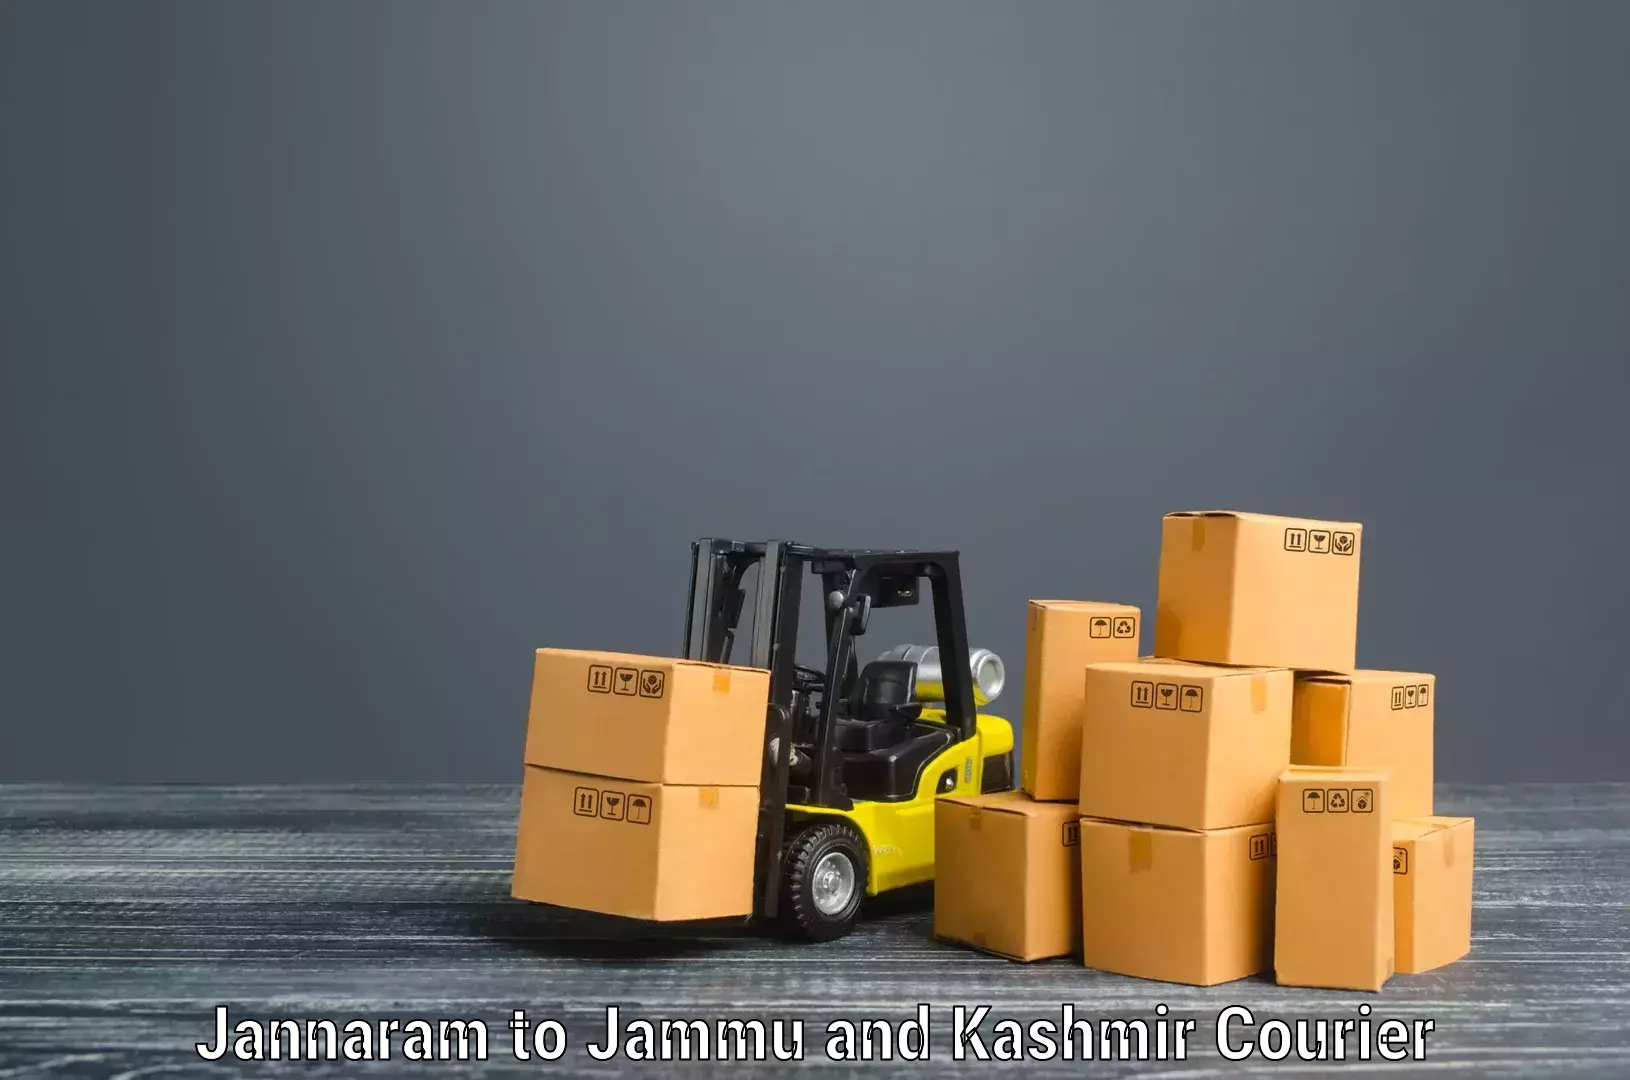 Furniture moving assistance in Jannaram to Leh